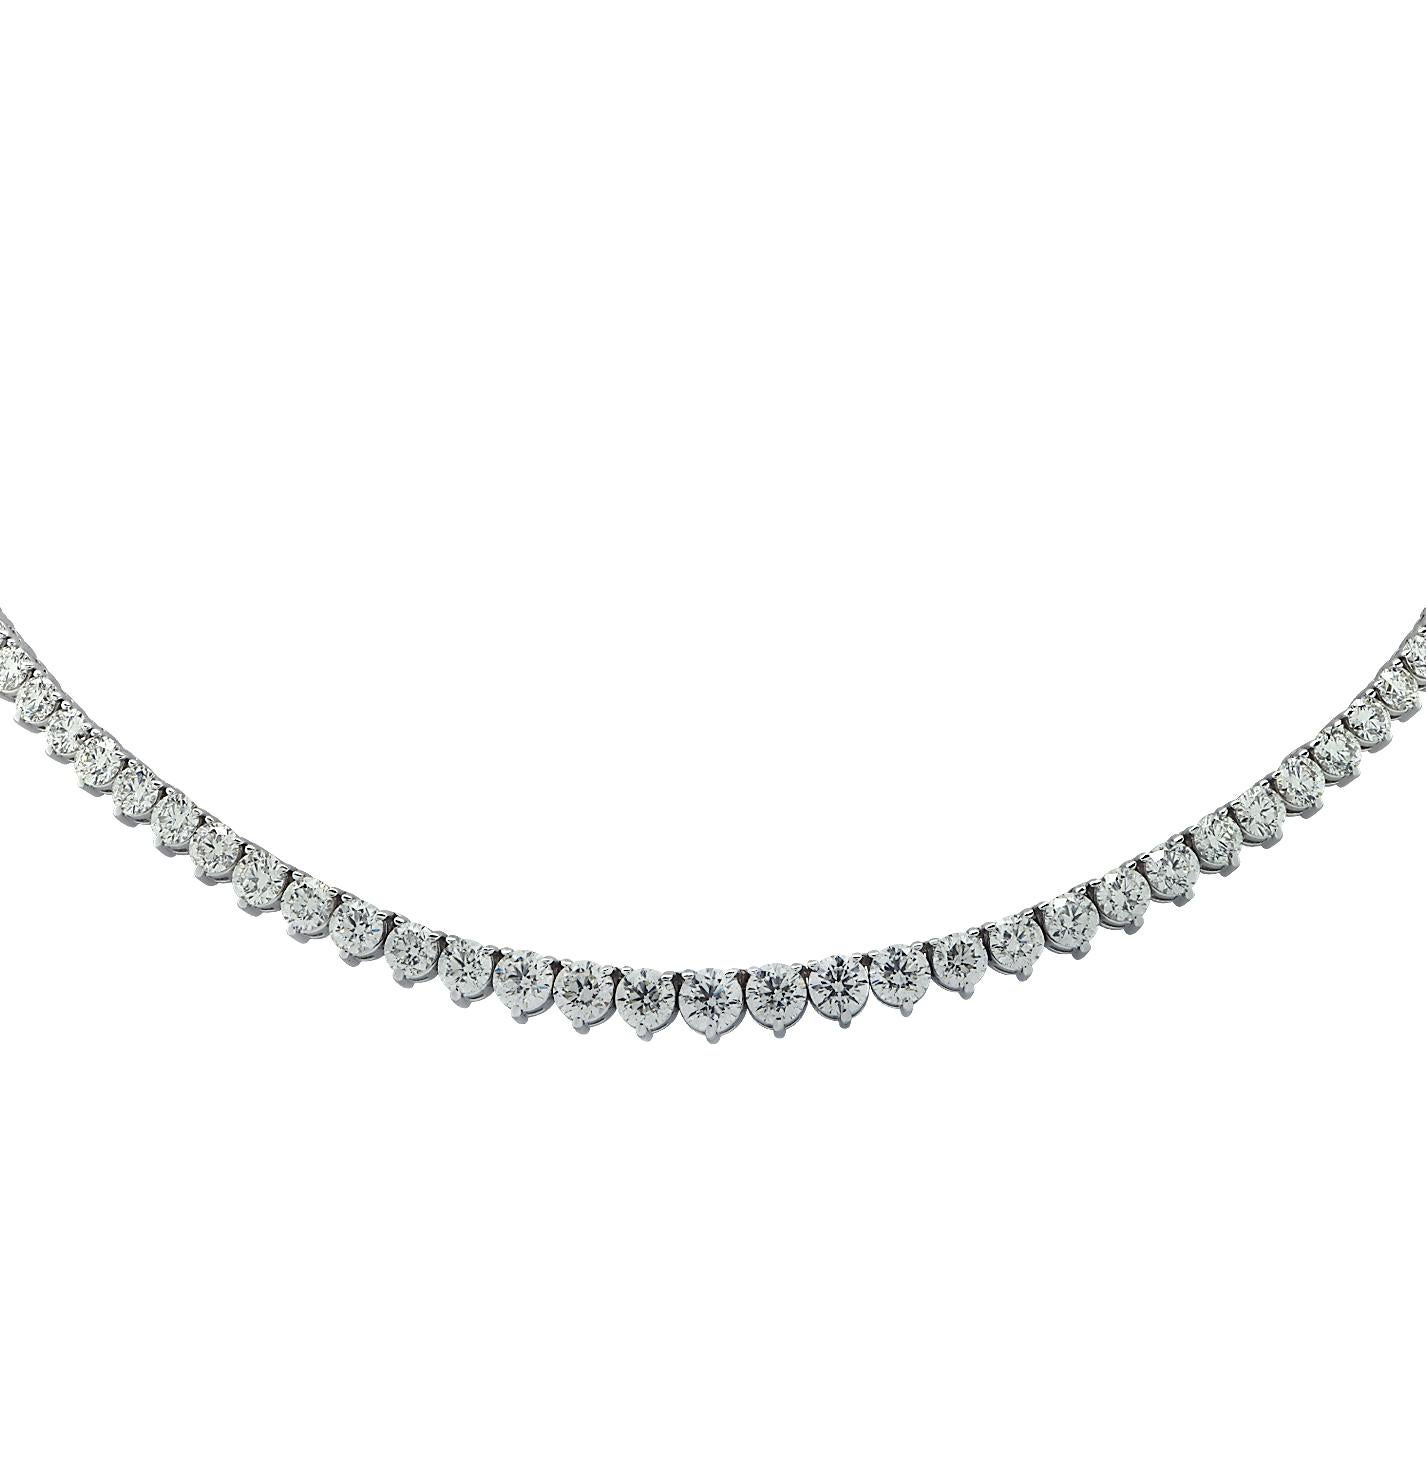 Vivid Diamonds diamond Riviera Necklace crafted in 14 Karat White Gold, showcasing 179 round brilliant cut diamonds weighing 8.55 carats, G-H color, SI clarity. Each diamond was carefully selected, perfectly matched and set in a seamless sea of